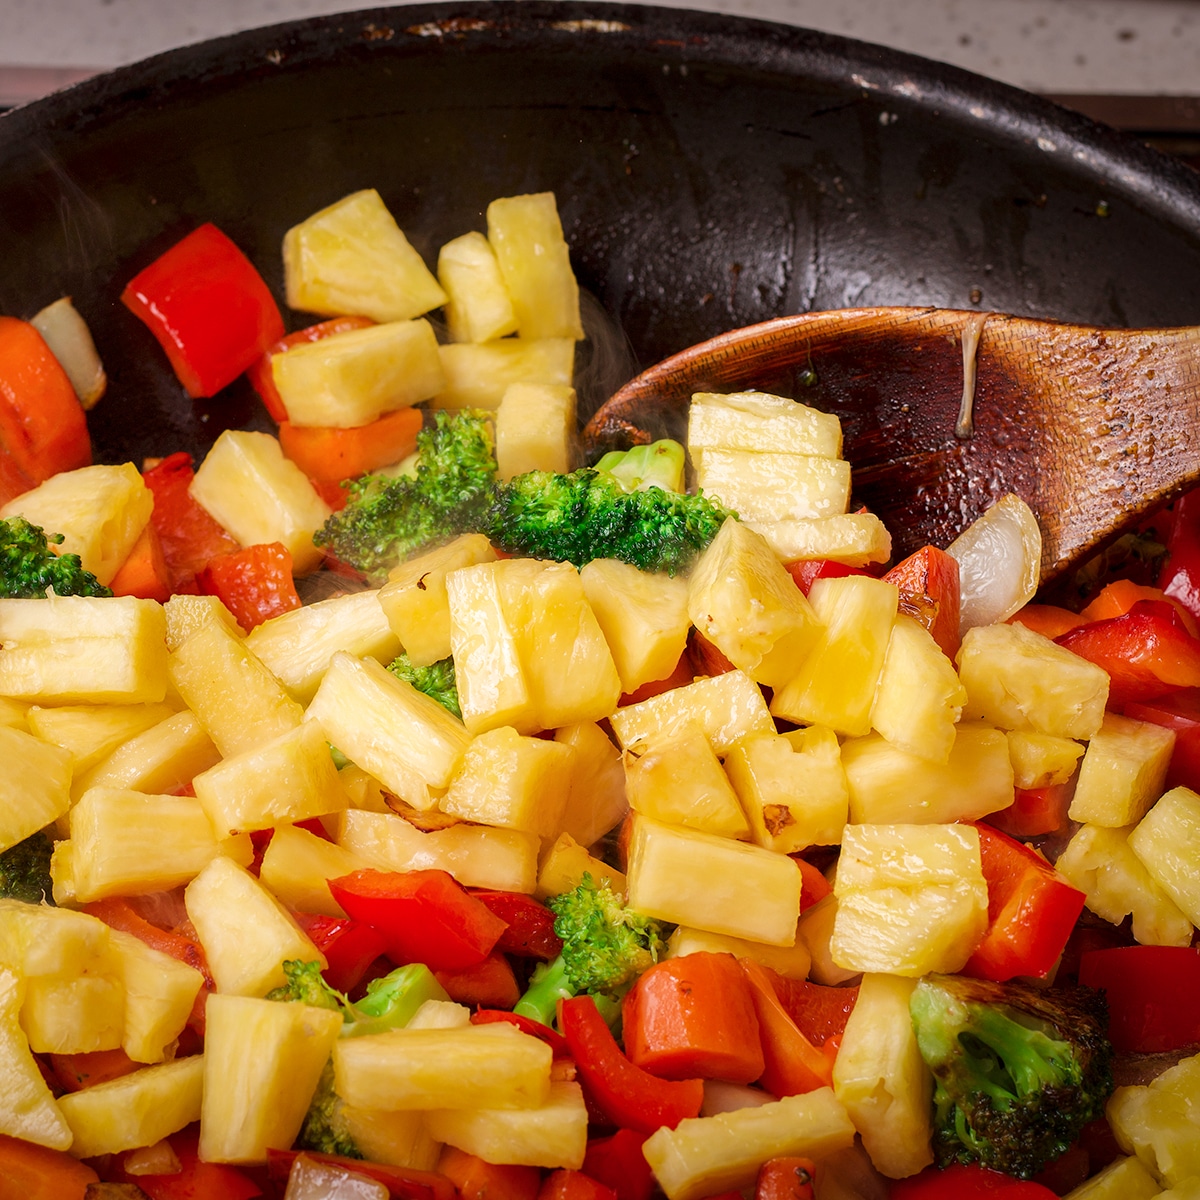 Using a wooden spoon to stir fresh pineapple into vegetables as they cook in a skillet.